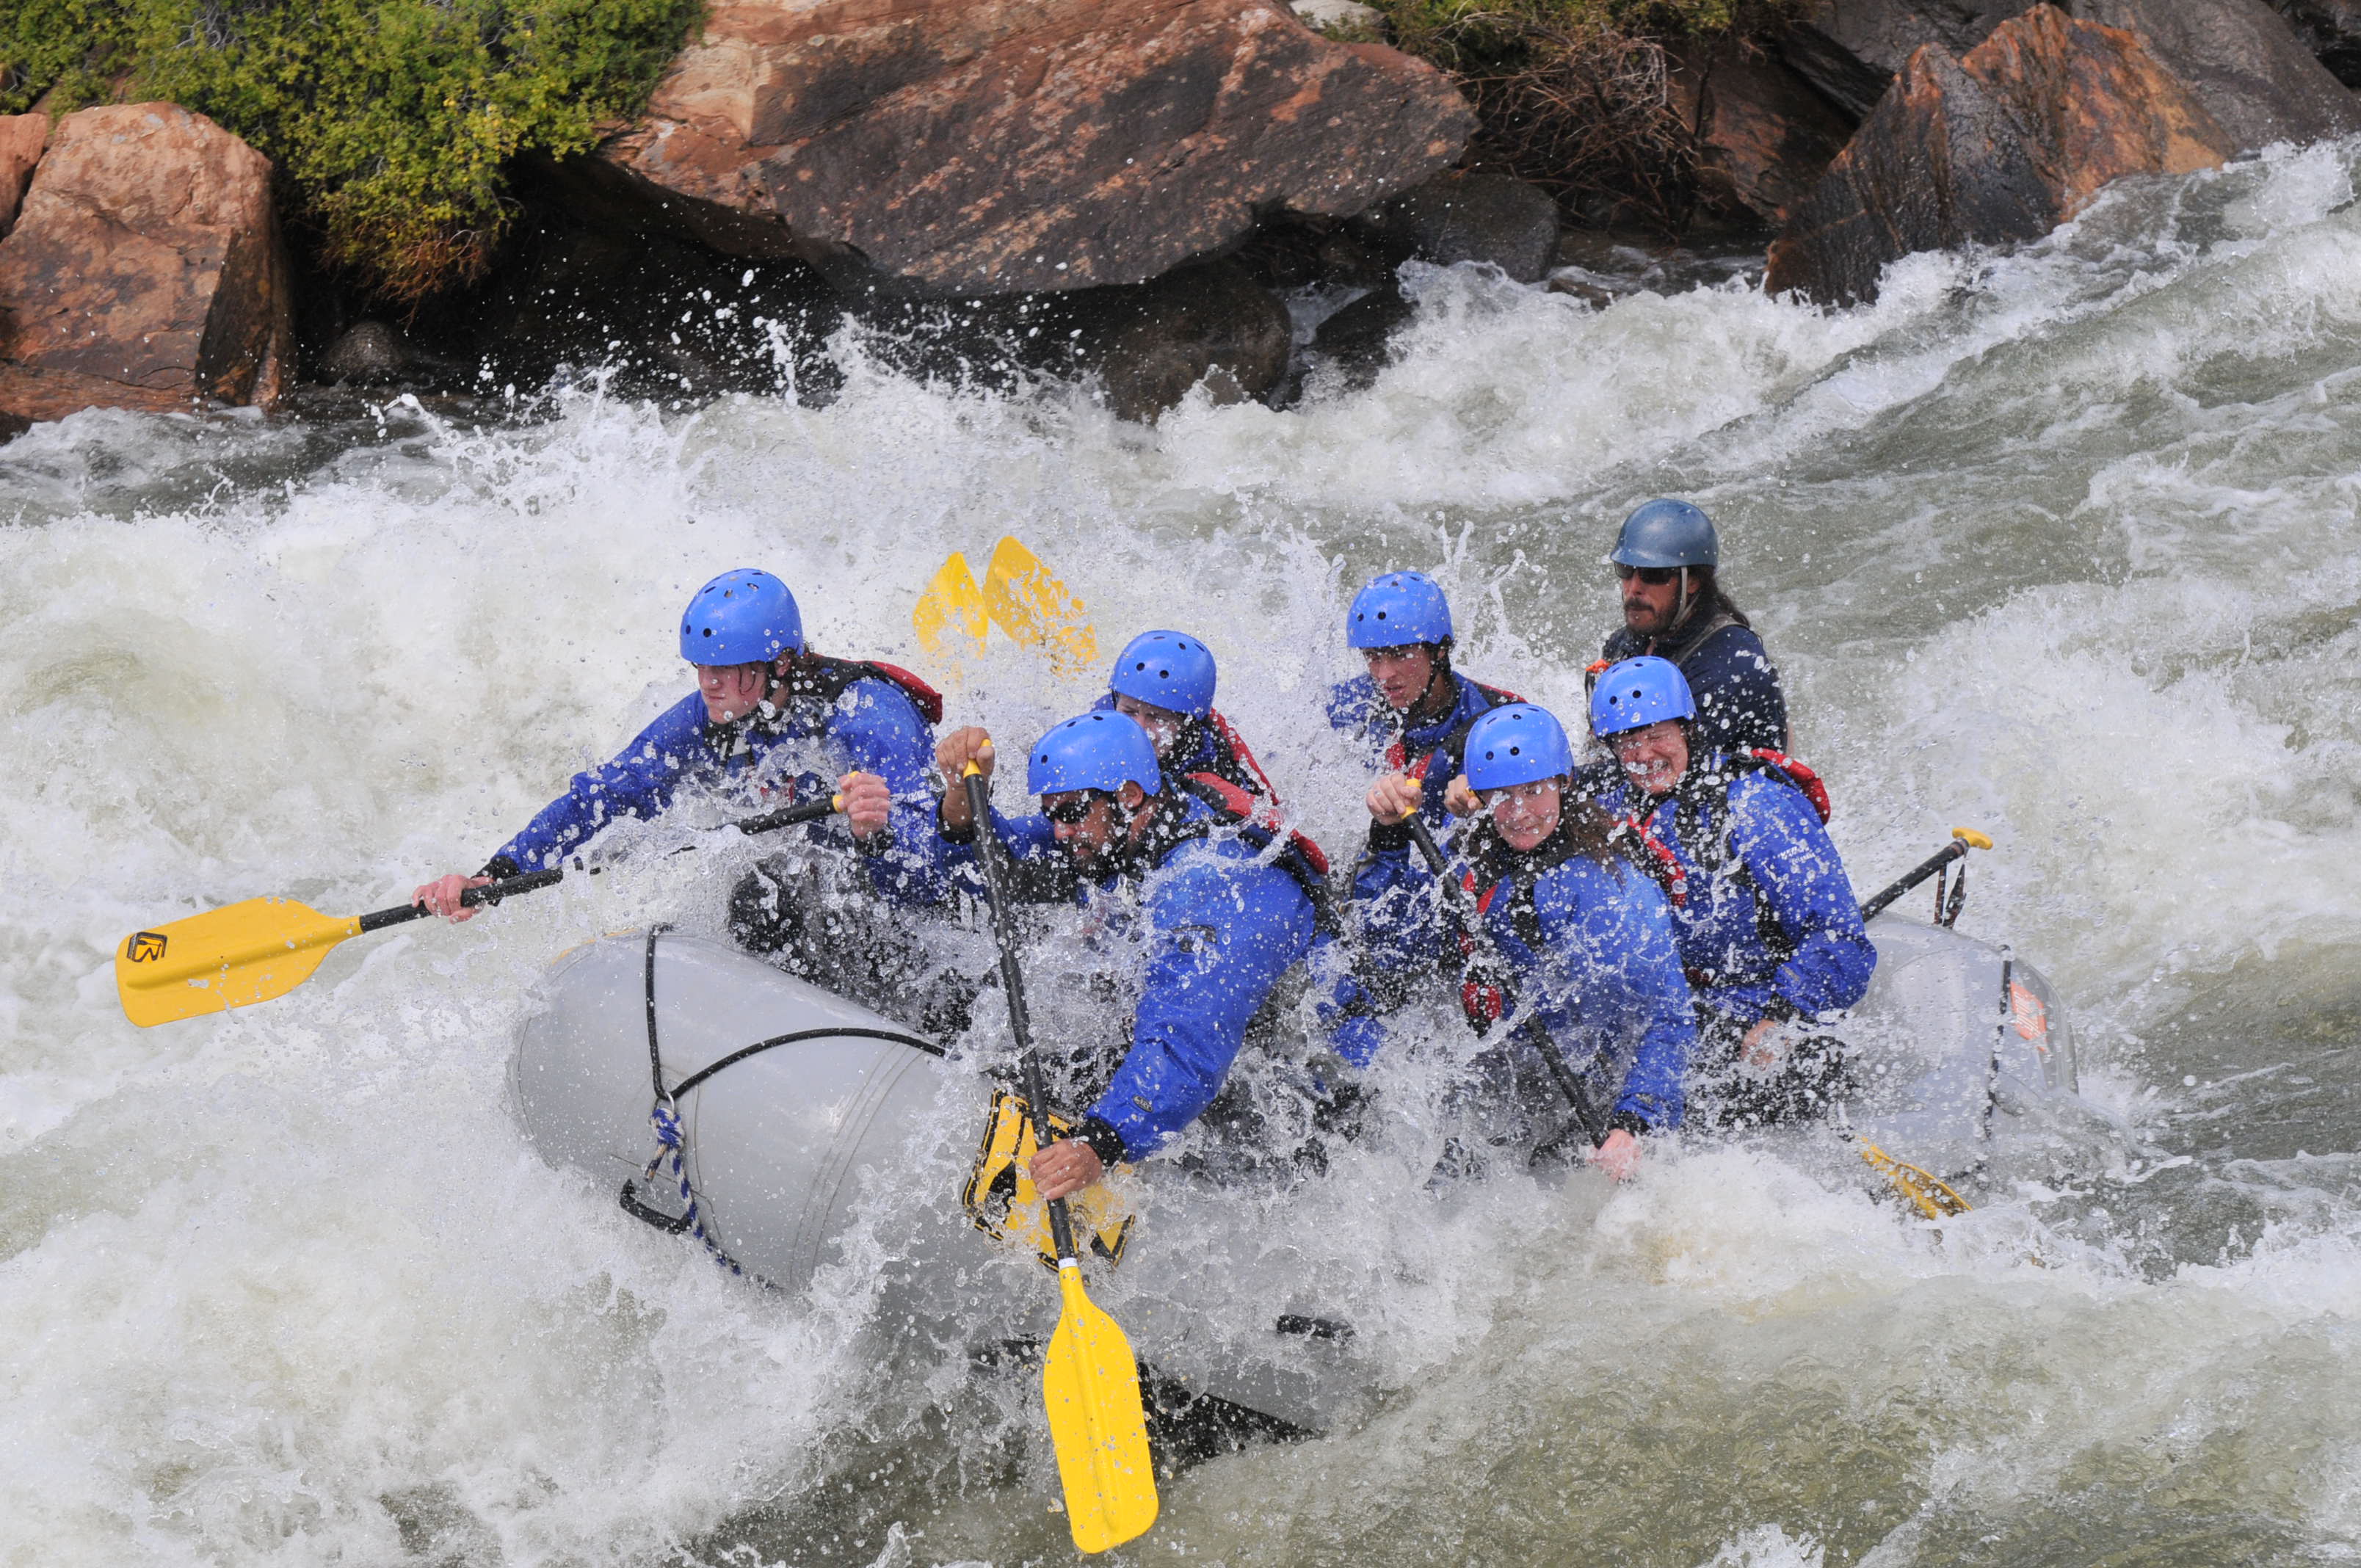 Colorado Whitewater Rafting Company Announces Re-Opening of the Numbers ...